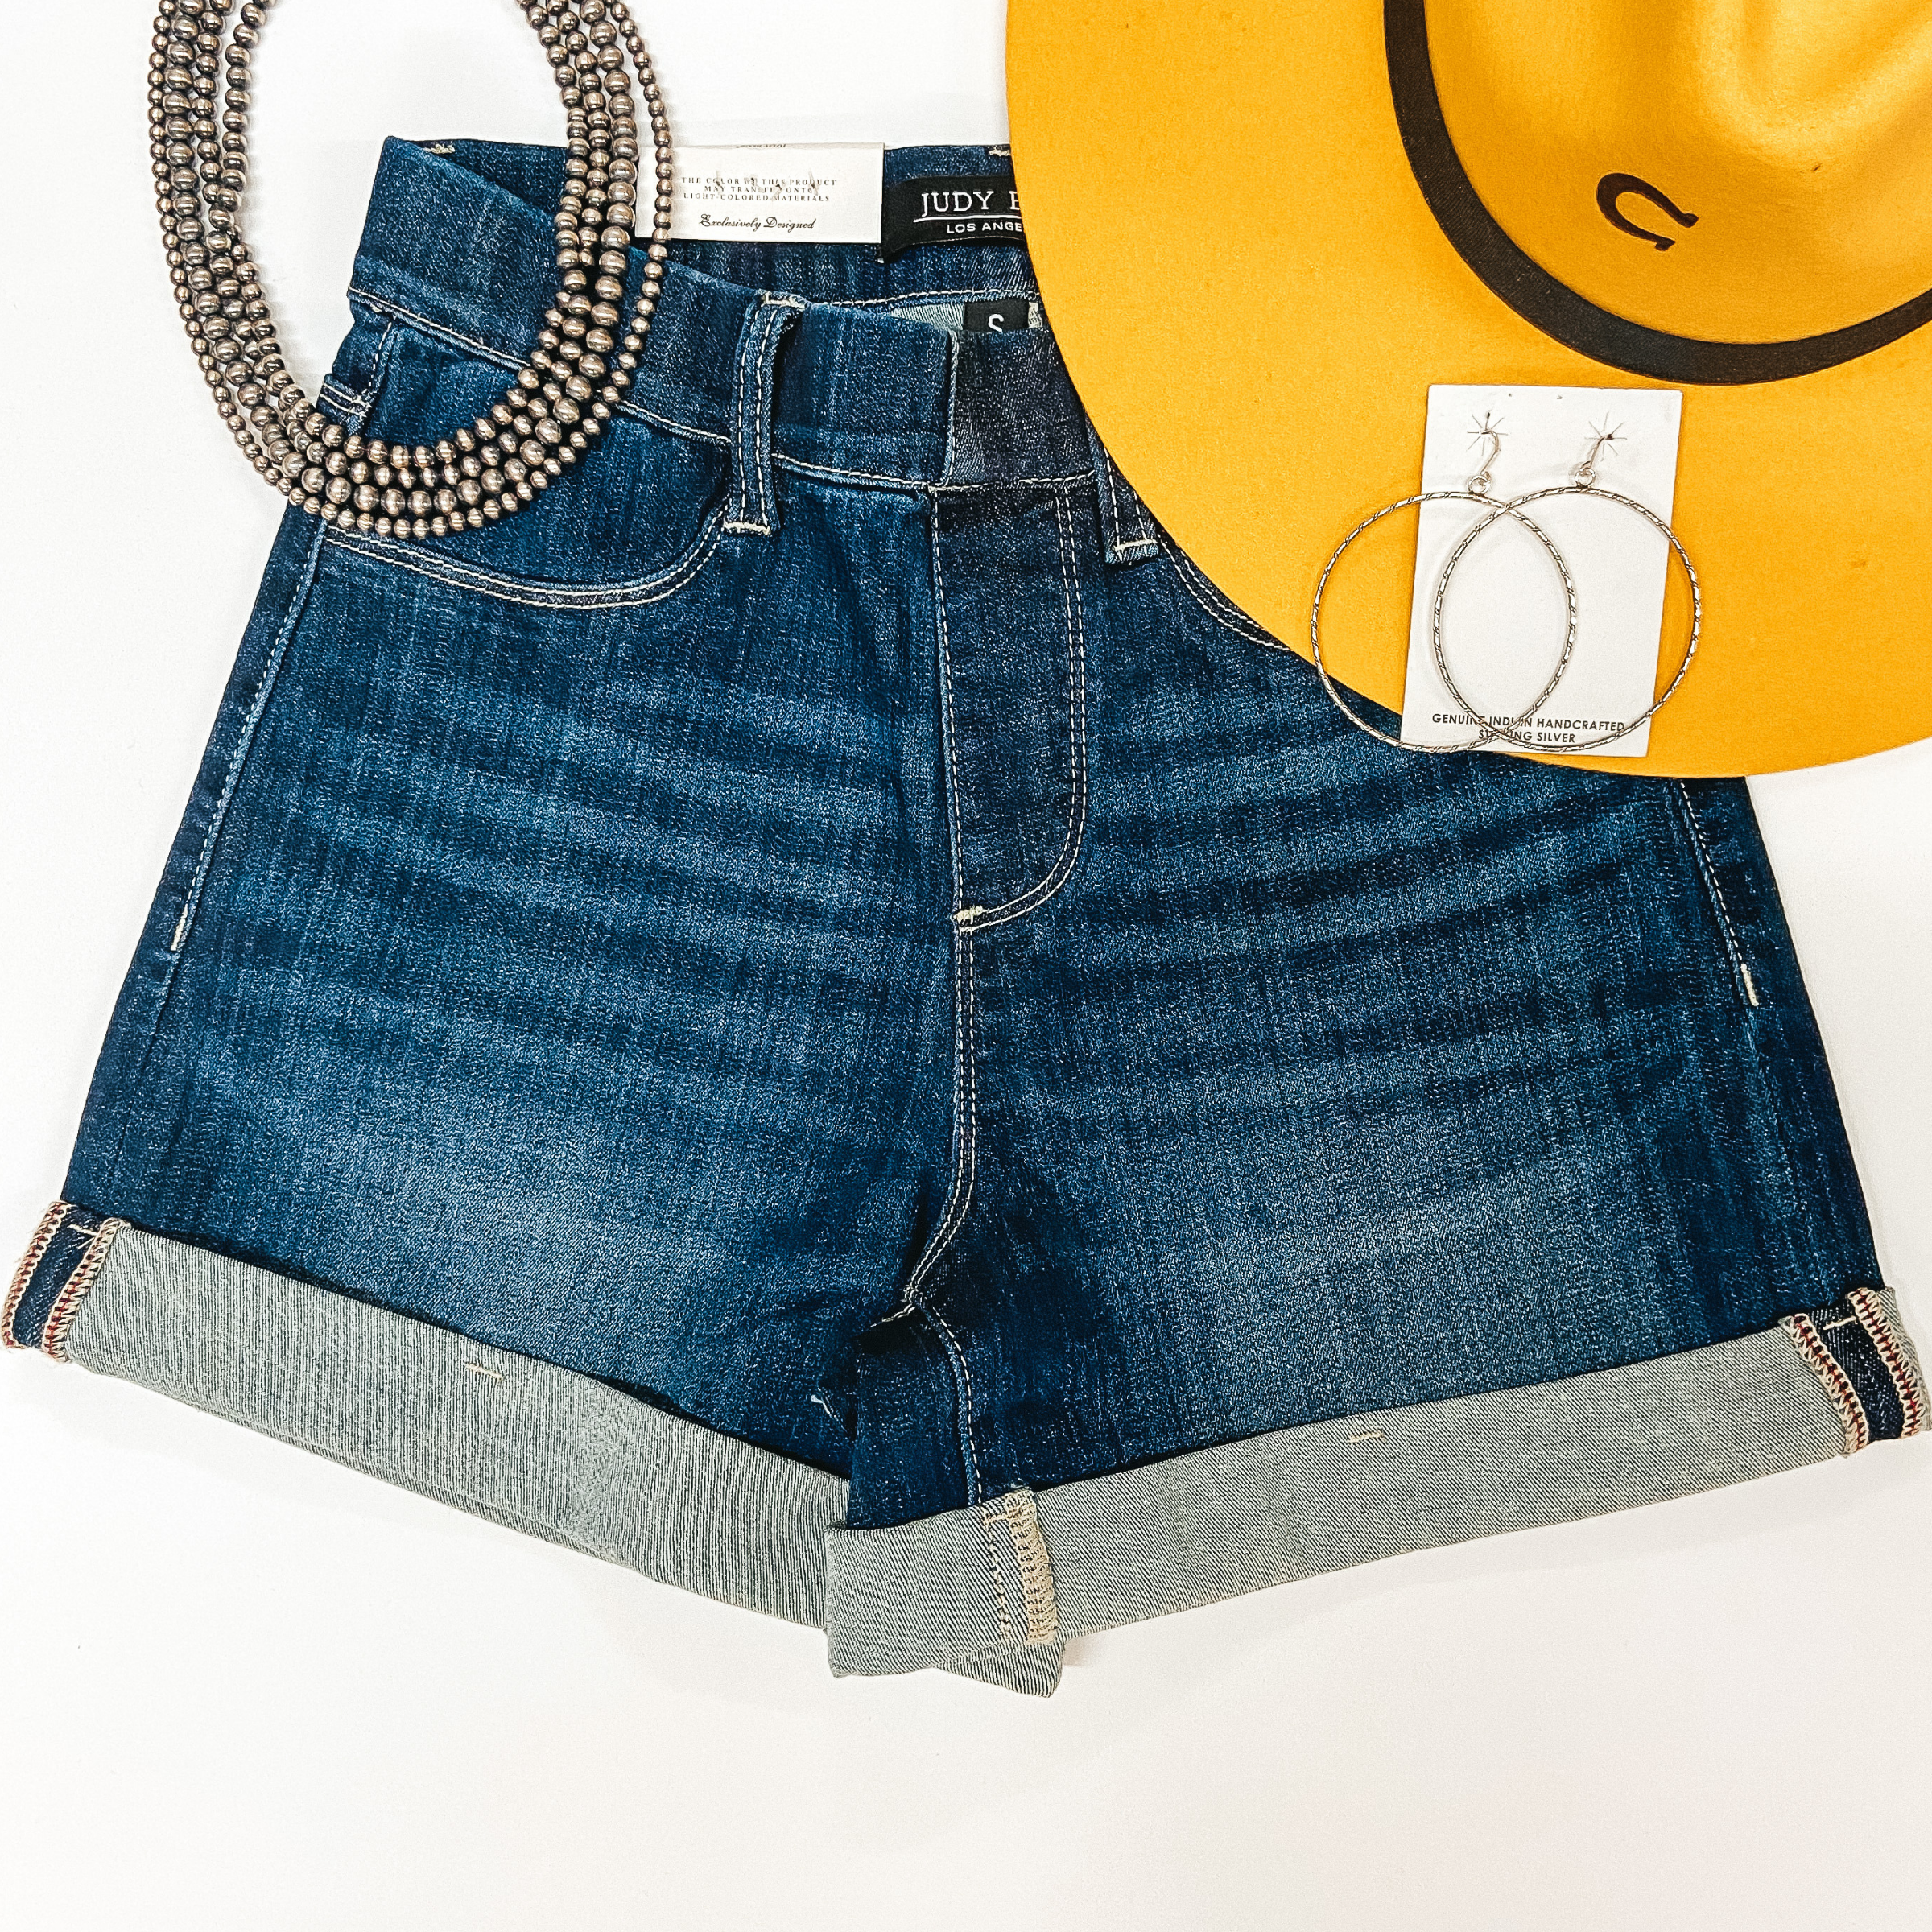 A pair of dark wash elastic waist shorts that have a cuffed hem. Pictured on white background with sterling silver jewelry and a yellow hat.